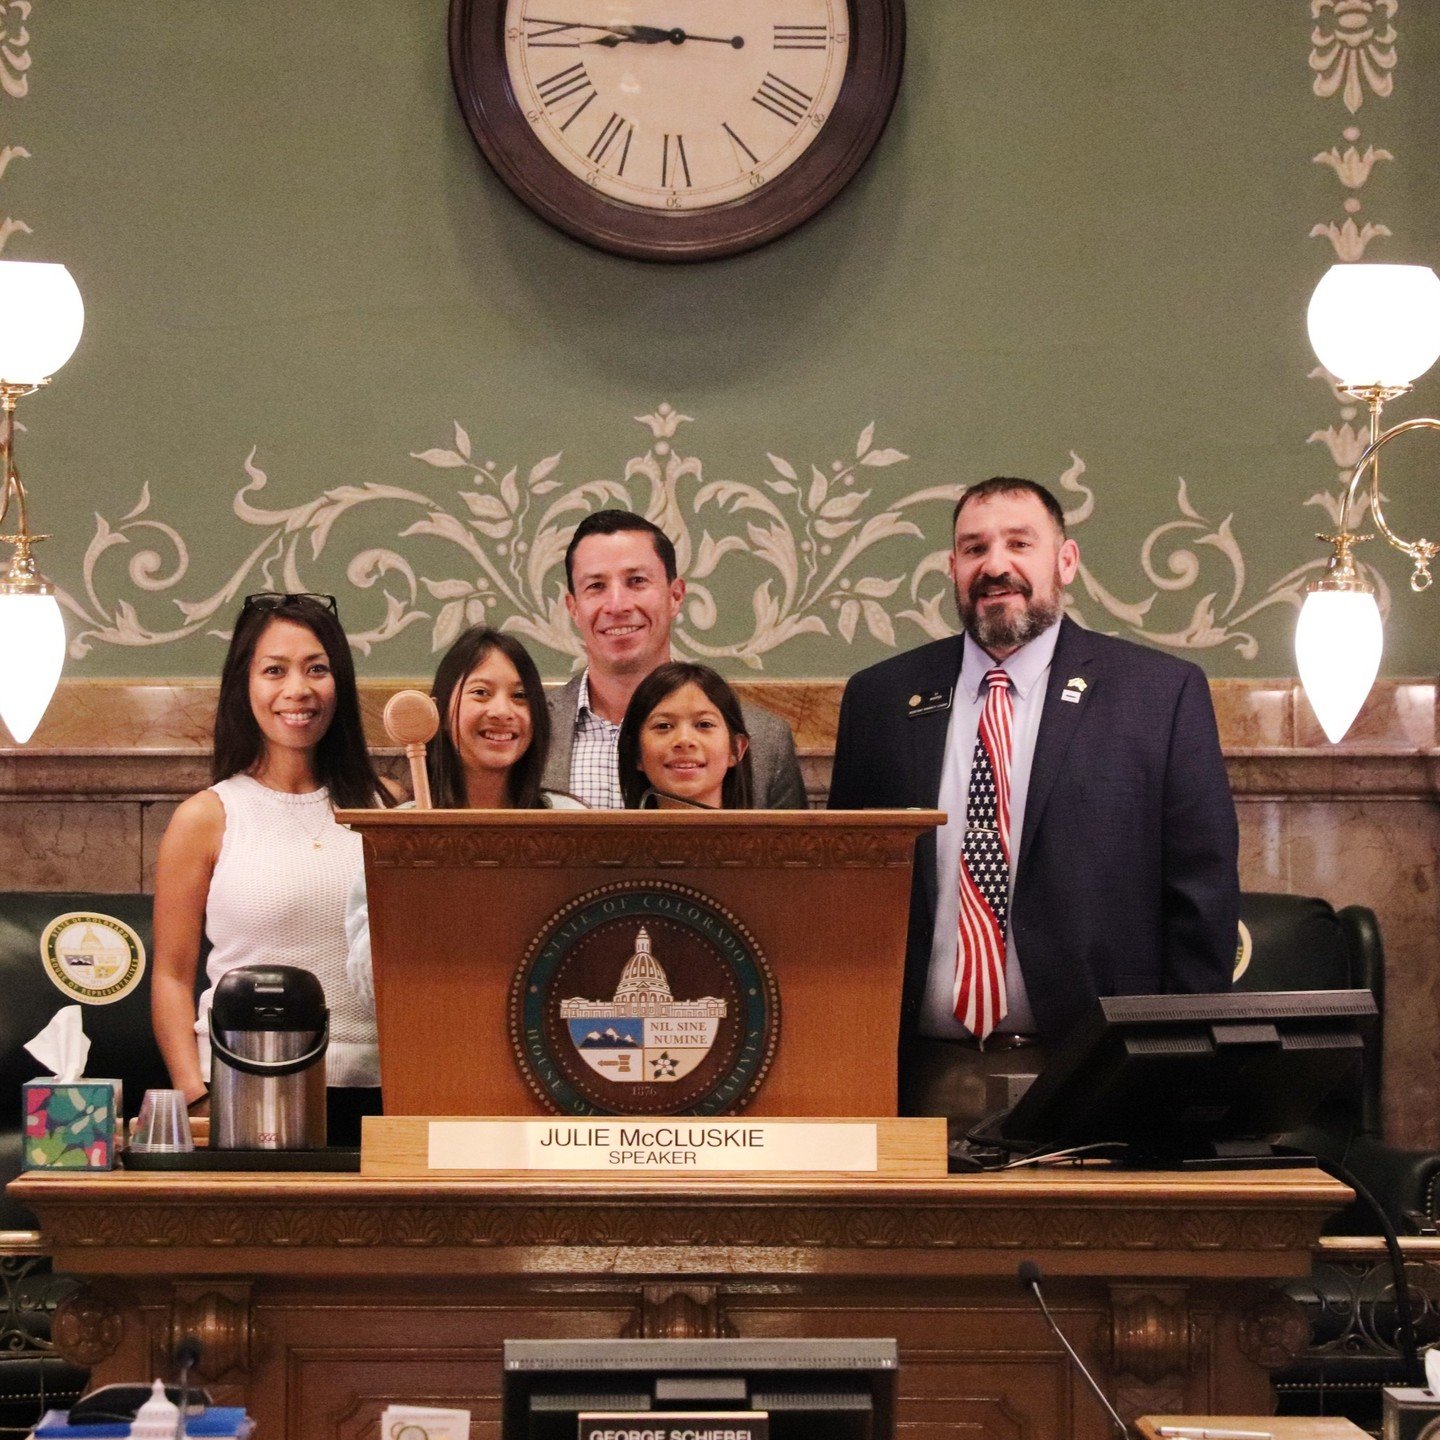 Today @reptywinter honored Chris Cordova as an esteemed guest on the House floor. Chris is an Army veteran with 24 years of service, including 4 combat tours. He holds a Master's in Physician Assistant Studies &amp; a Doctorate of Science. Chris made